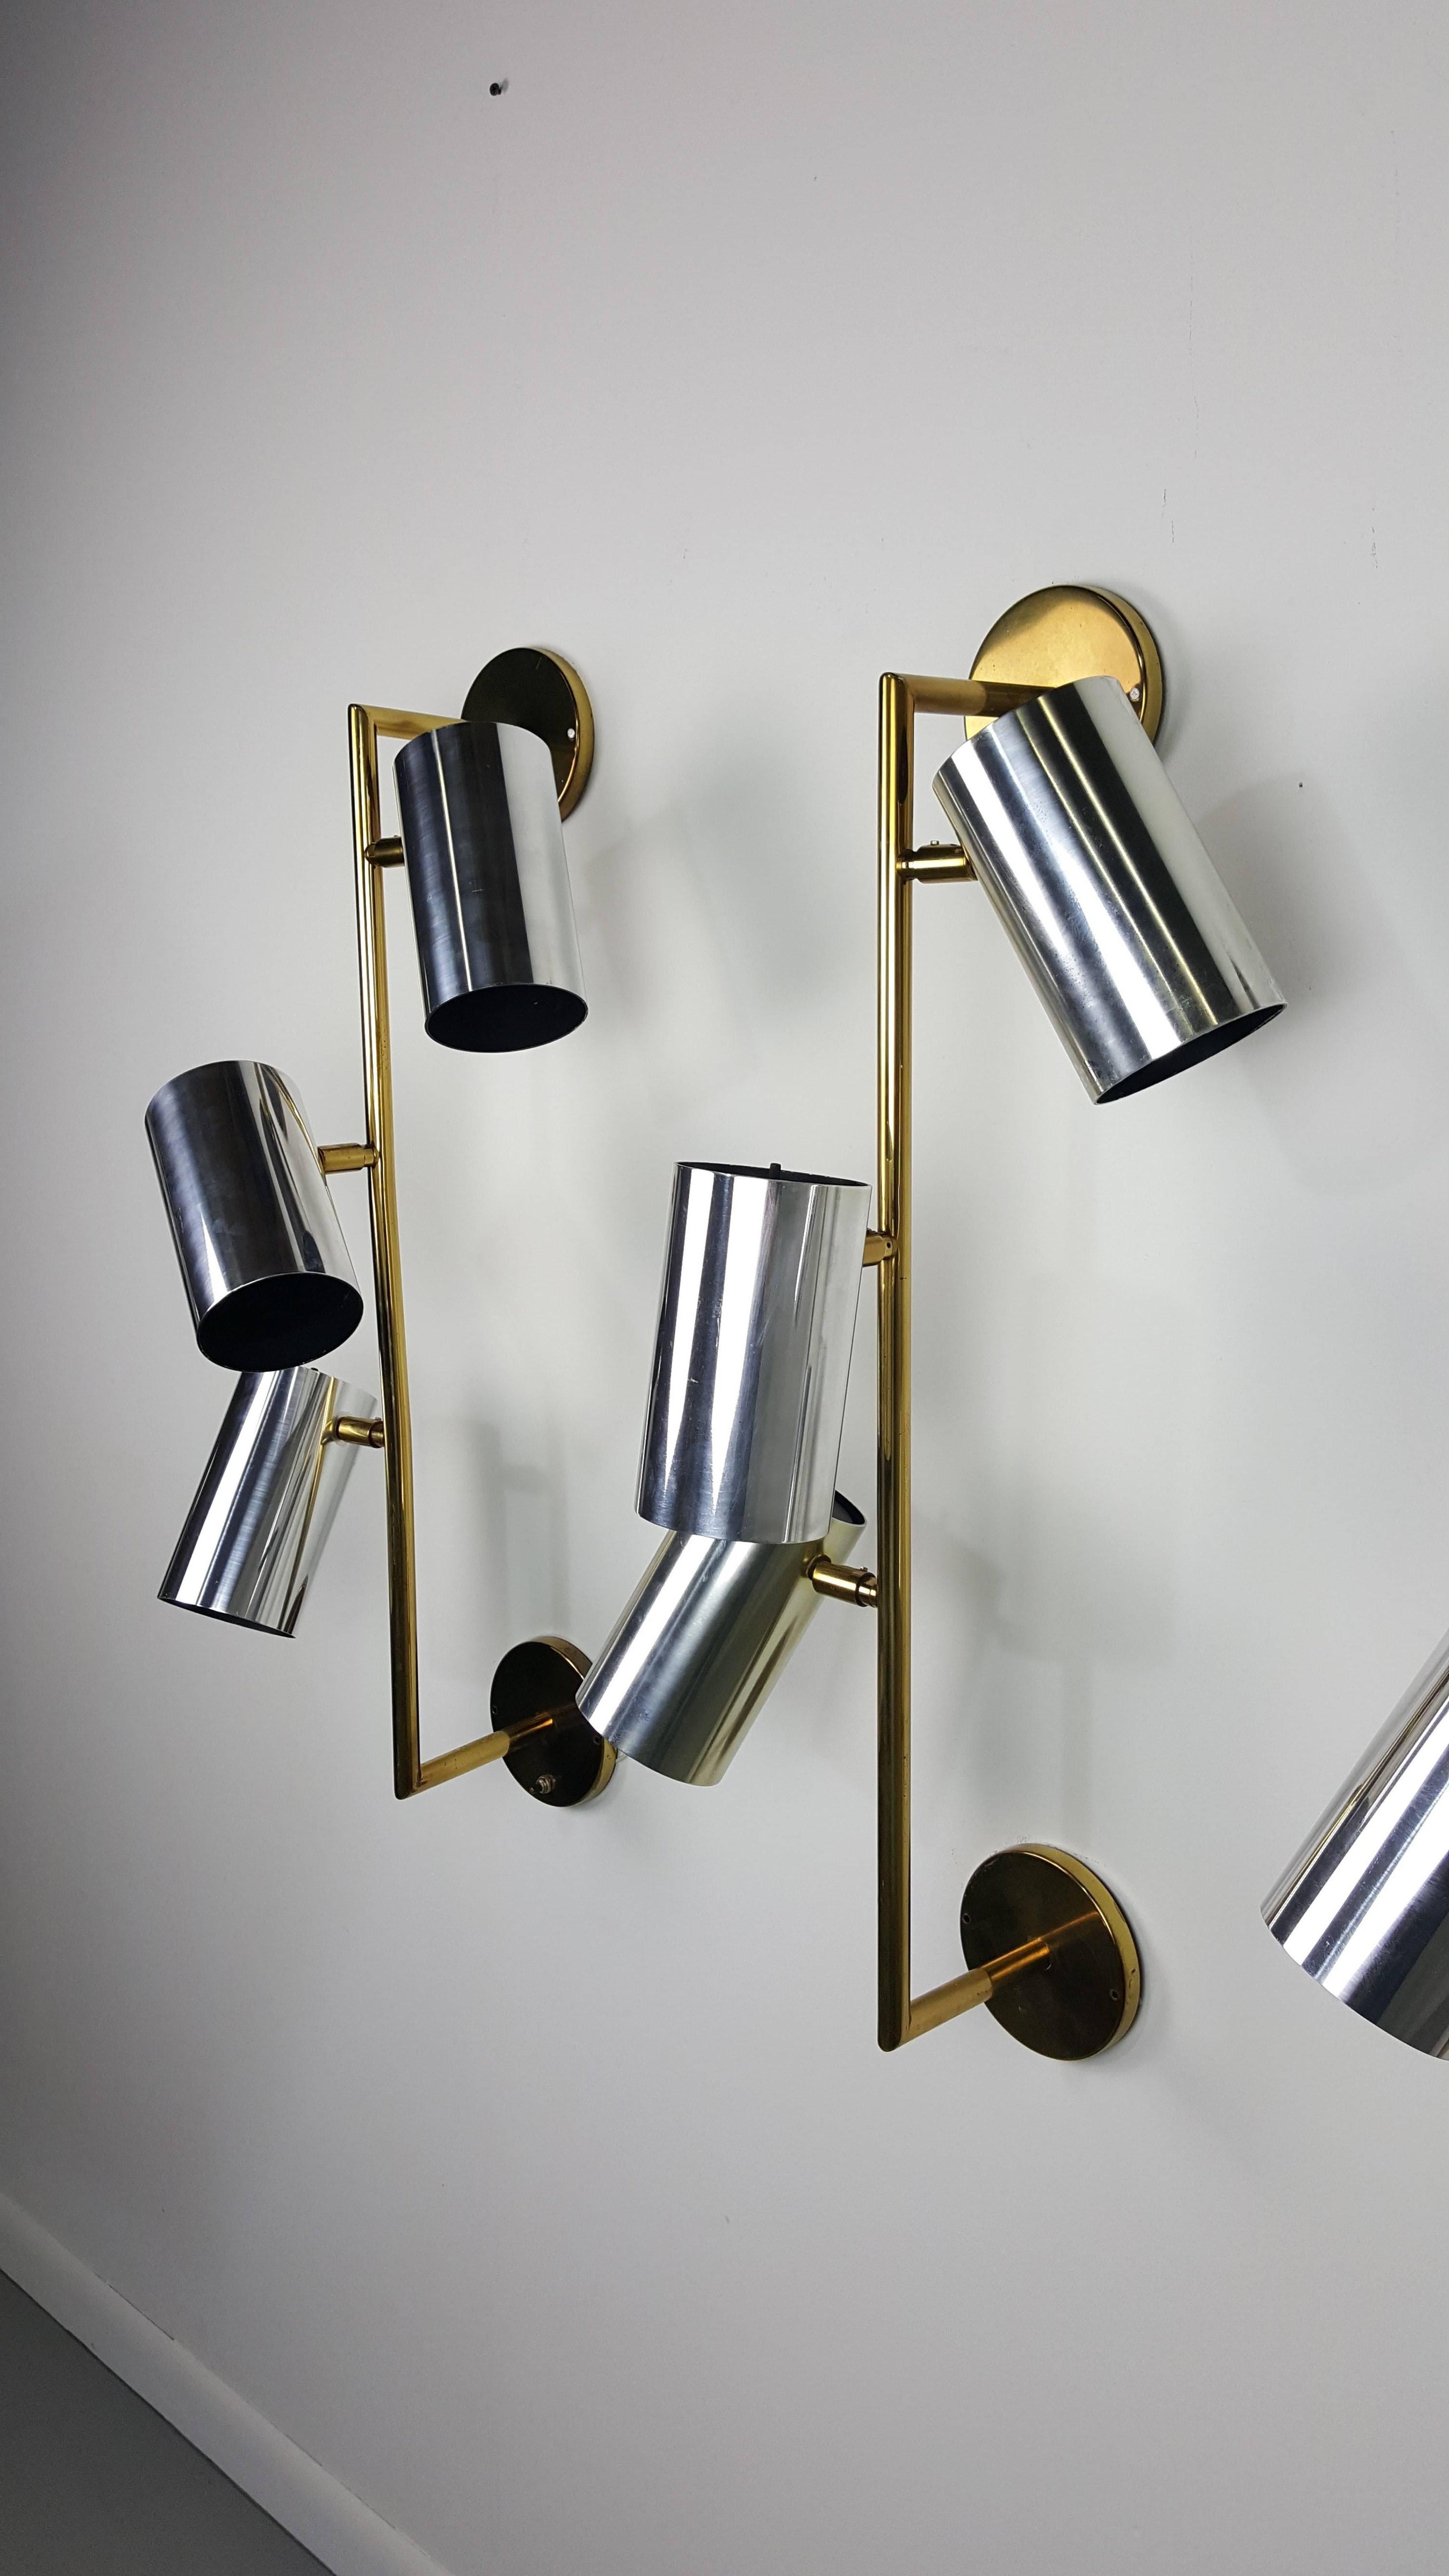 Late 20th Century Massive Brass and Chrome Architectural Wall Sconces by Koch and Lowy